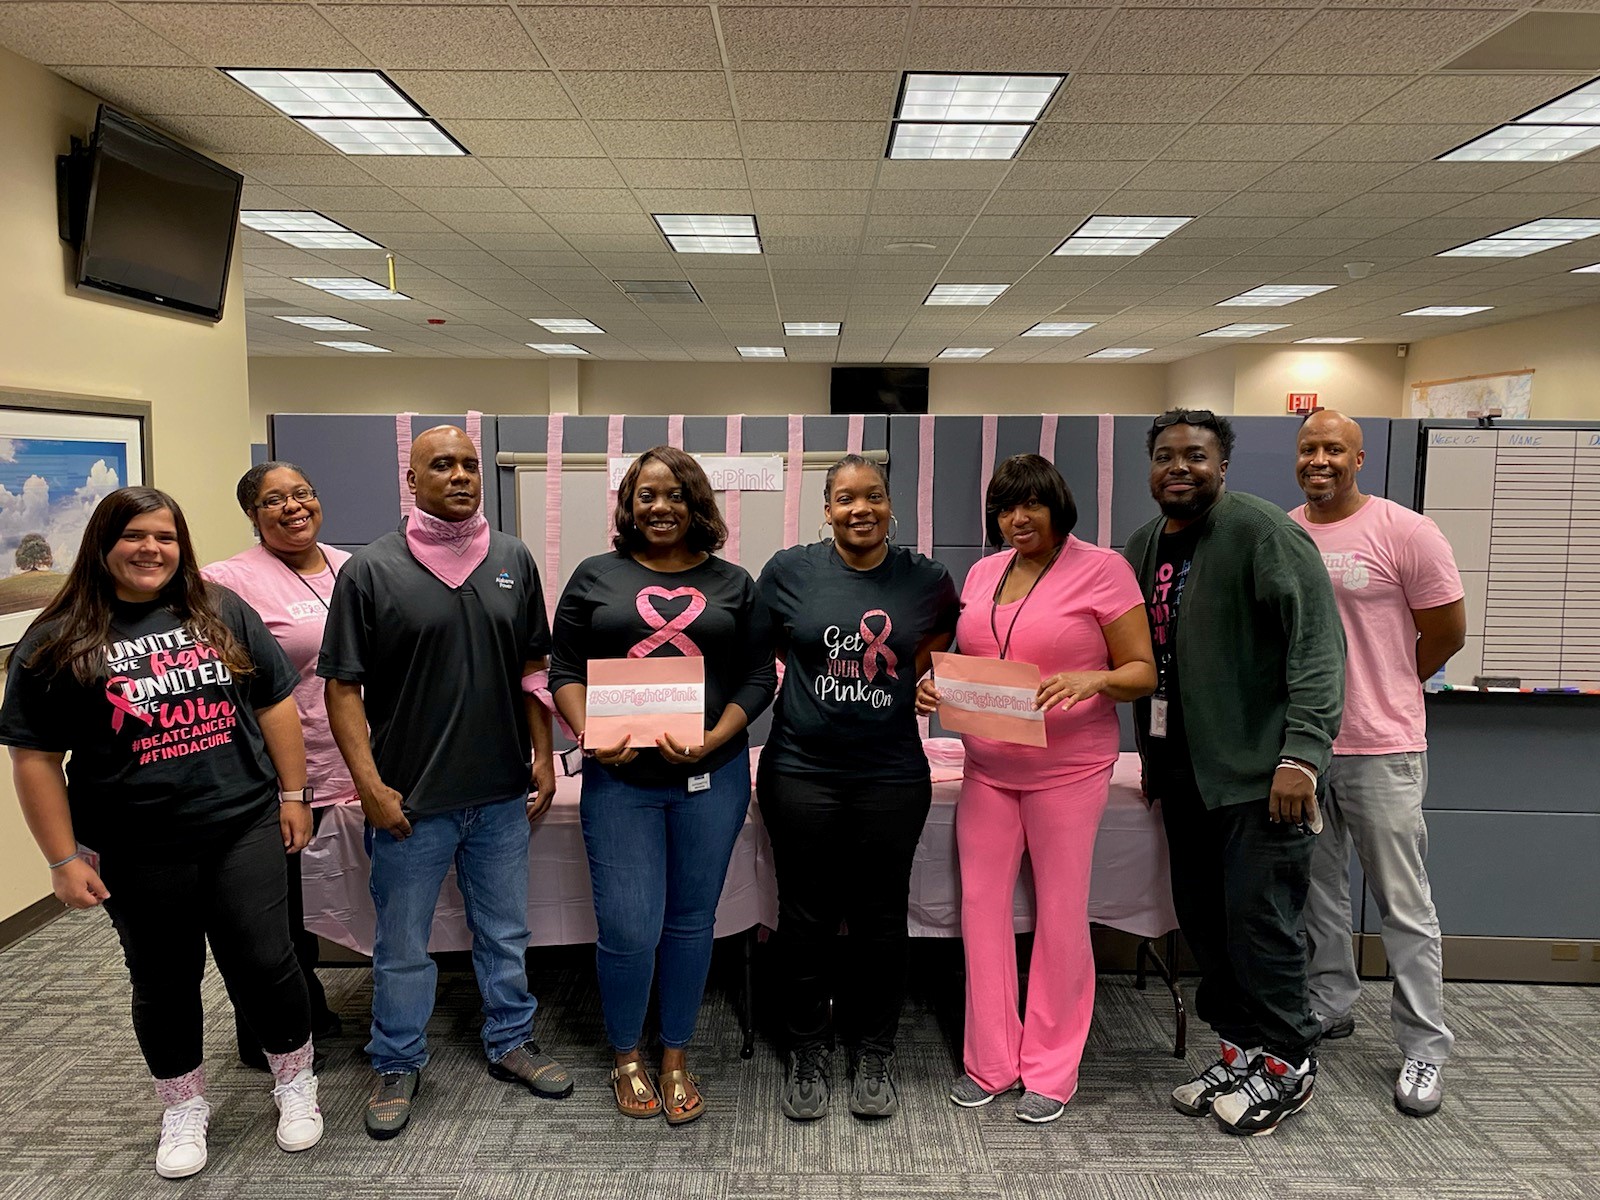 "We support Breast Cancer Awareness because thousands of lives are saved each year because of this focus!"- Jon Dunn, SR. CSR, West Jefferson Business Office 